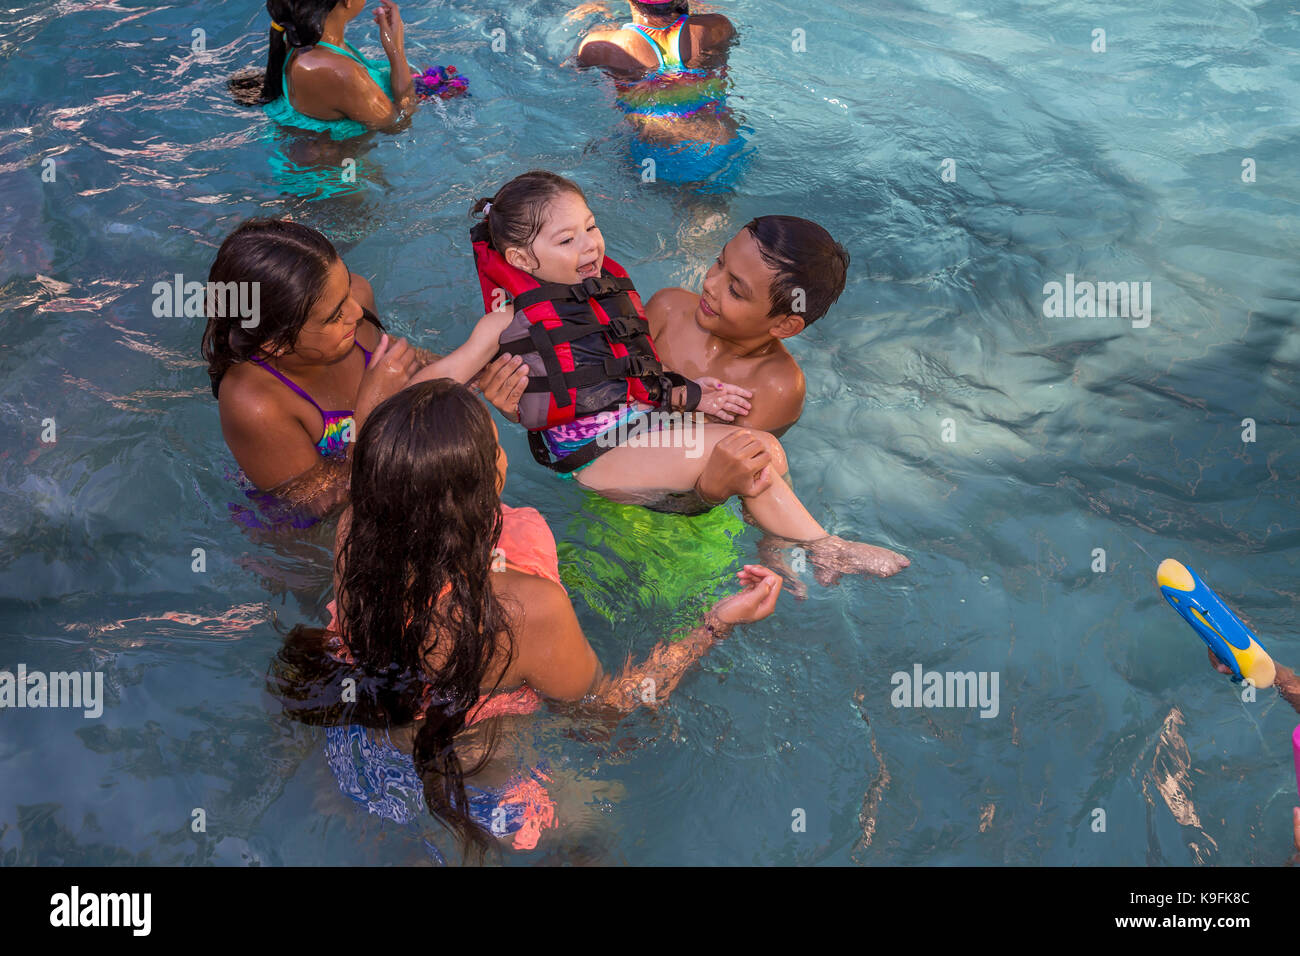 Hispanic children, boys and girls, playing in swimming pool, swimming pool, fresh water swimming pool, Castro Valley, Alameda County, California Stock Photo